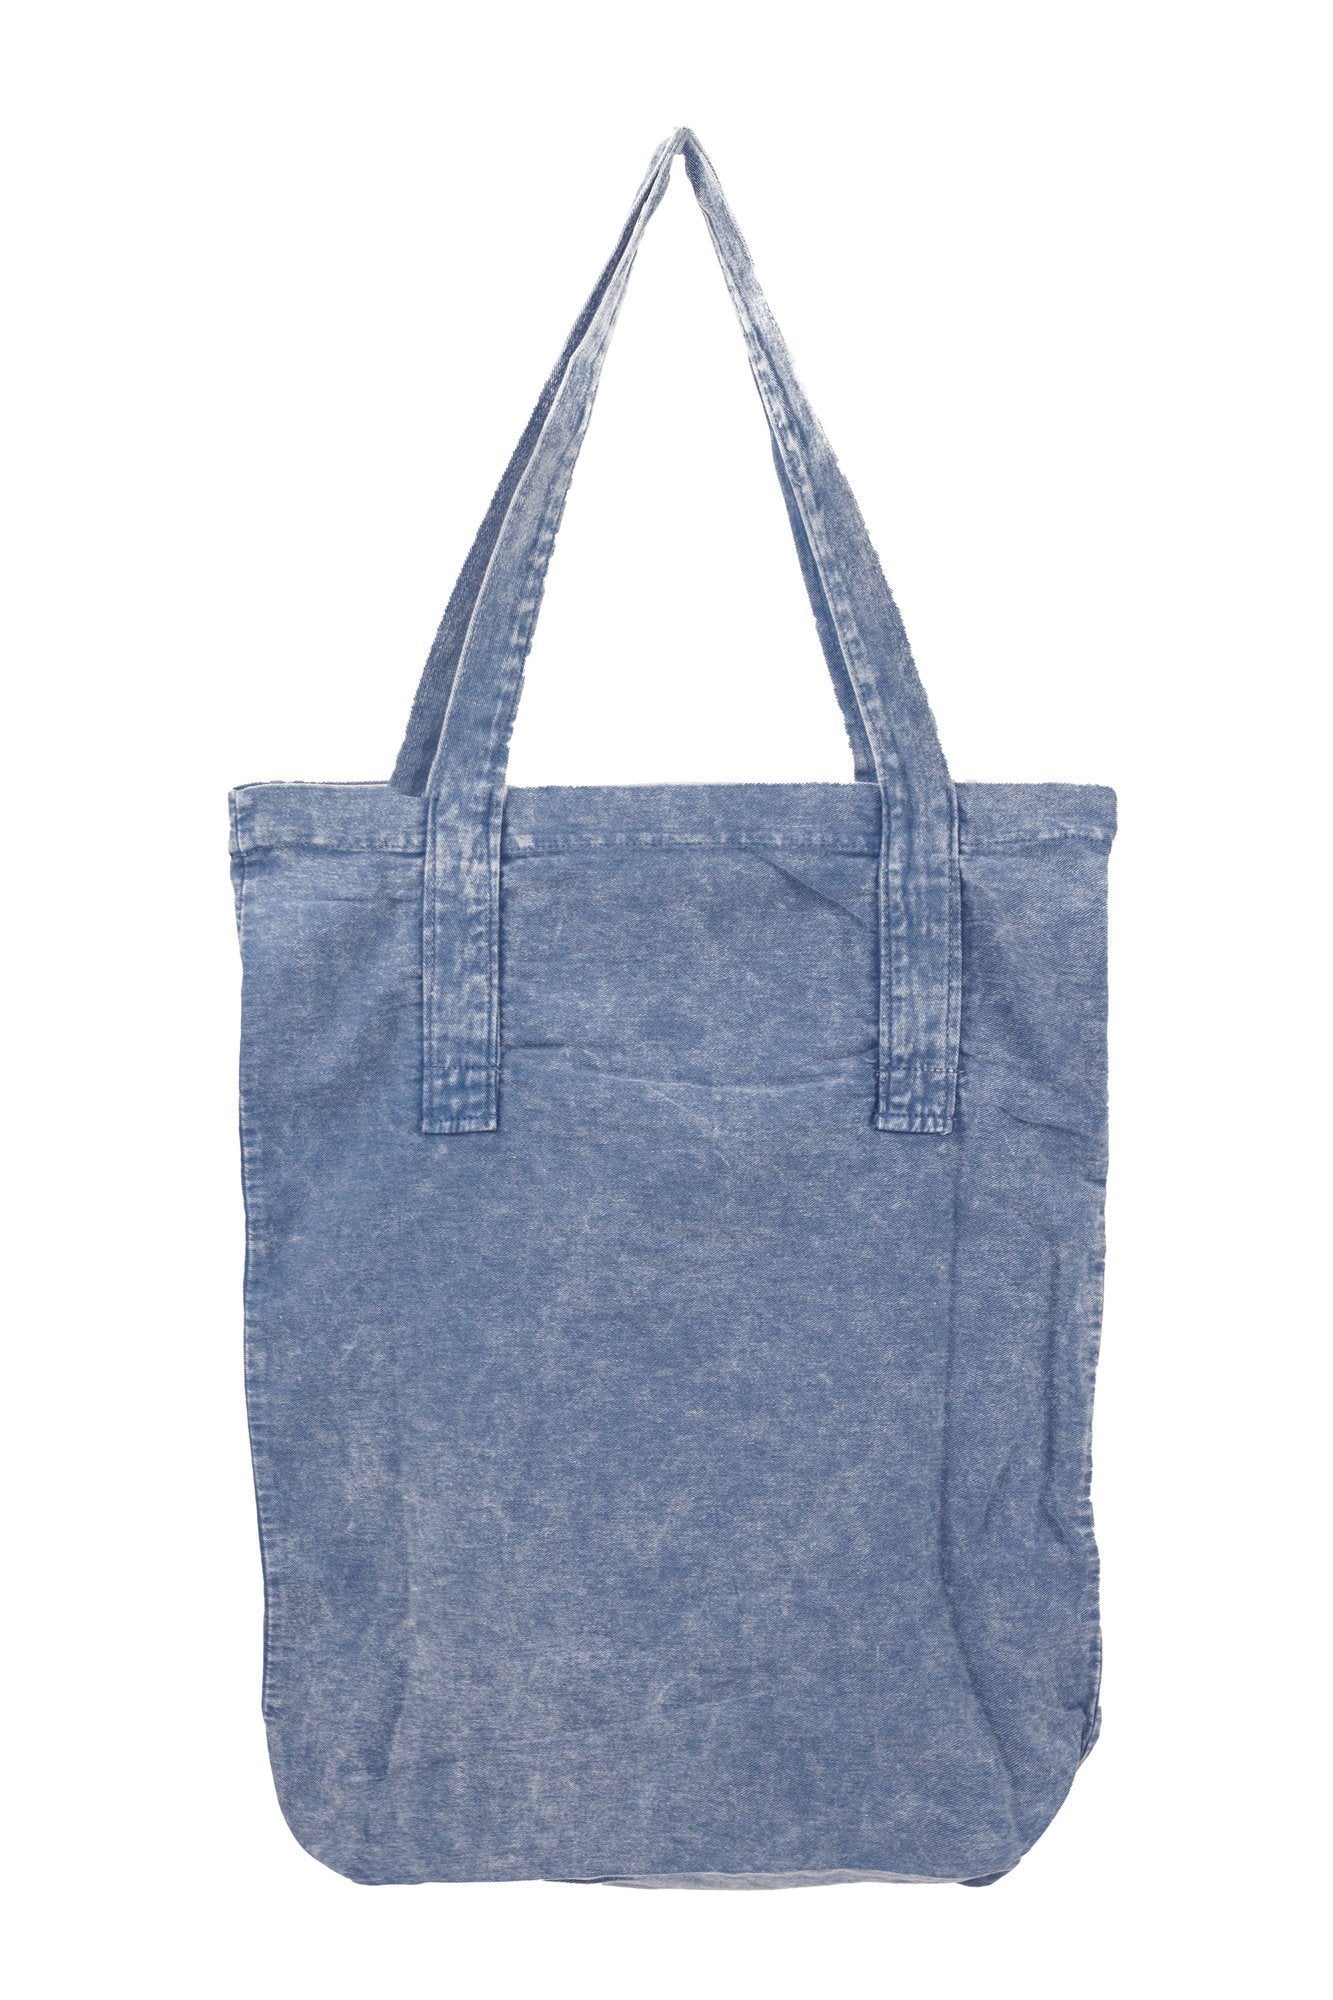 authentic blue denim look casual shoulder bag with embroidery - Breakmood